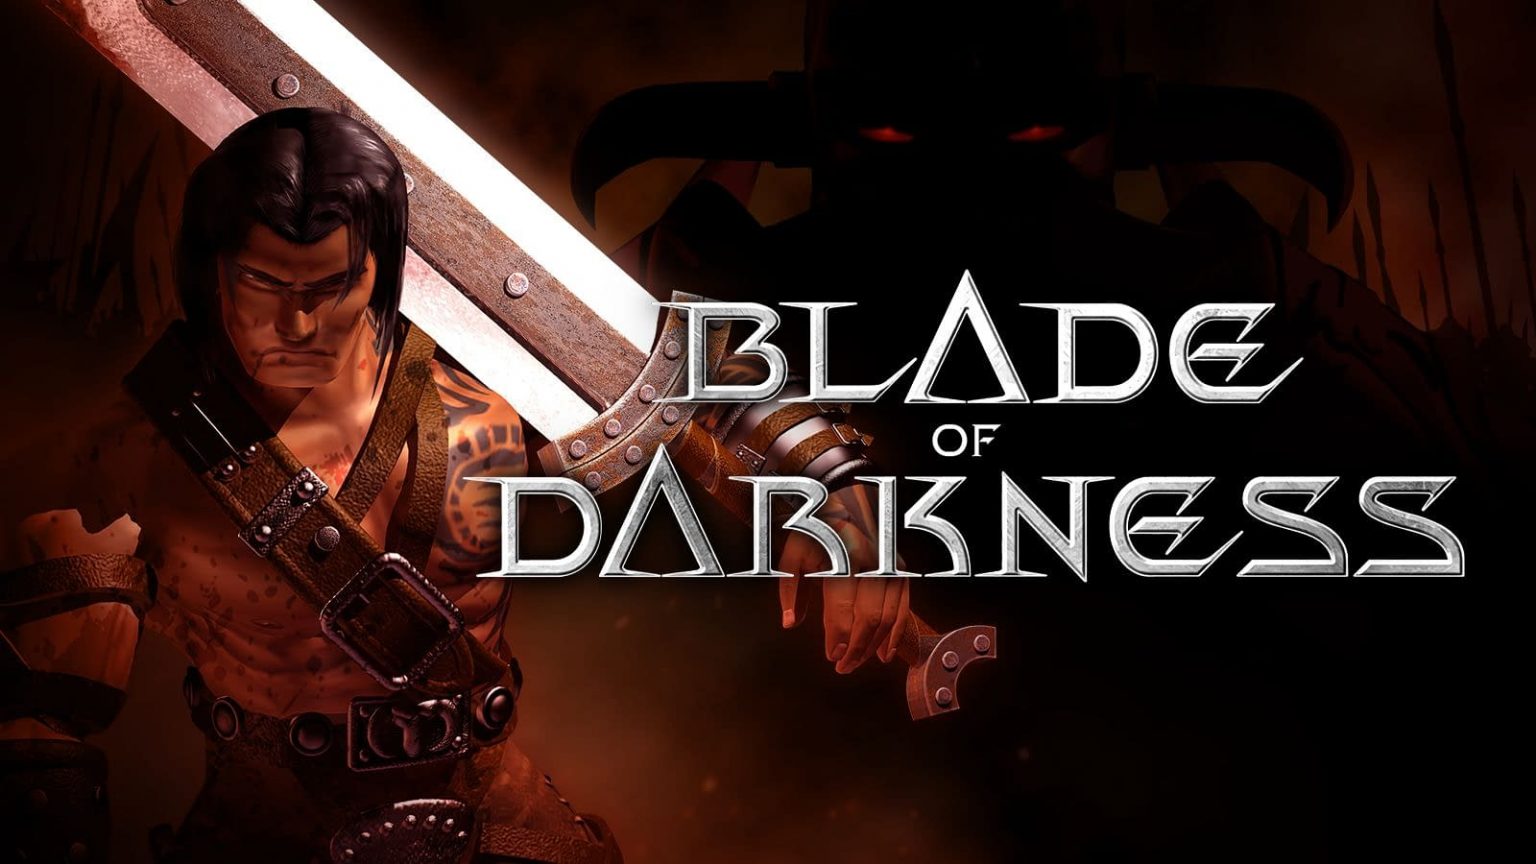 blade of darkness game full version free download for mac